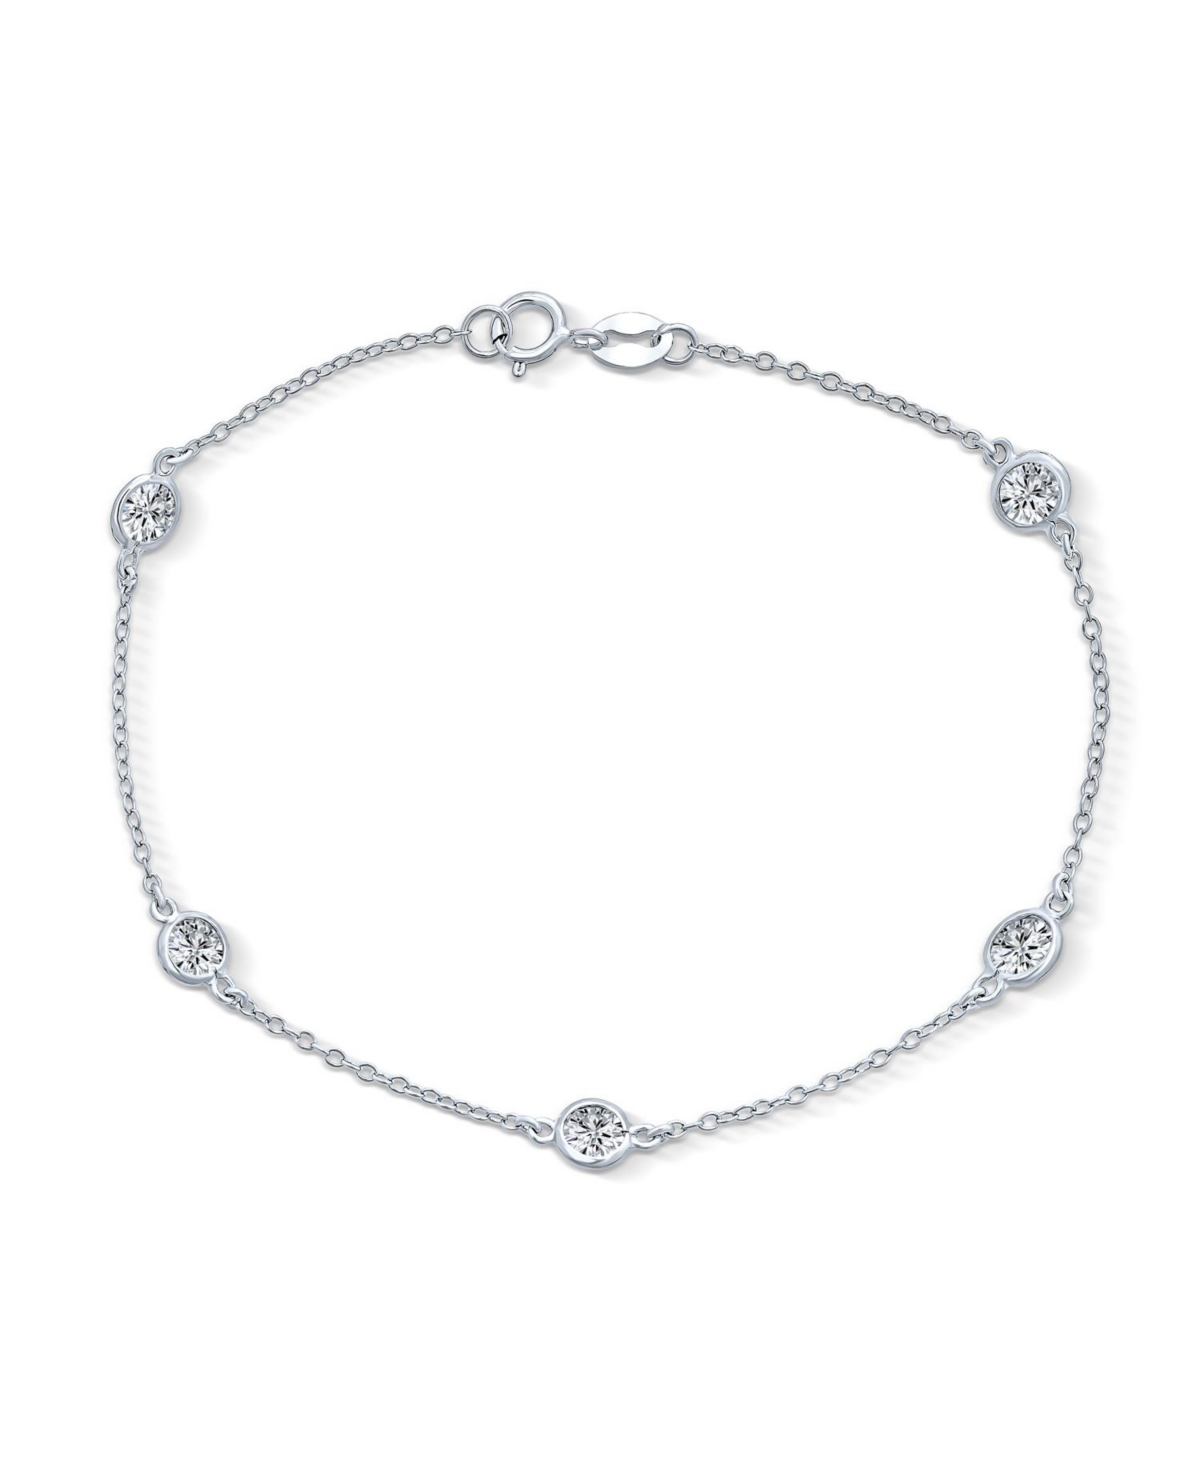 Elegant Delicate Cubic Zirconia Cz By The Yard Anklet Chain Link Ankle Bracelet For Women.925 Sterling Silver 9 Inch - Silver tone